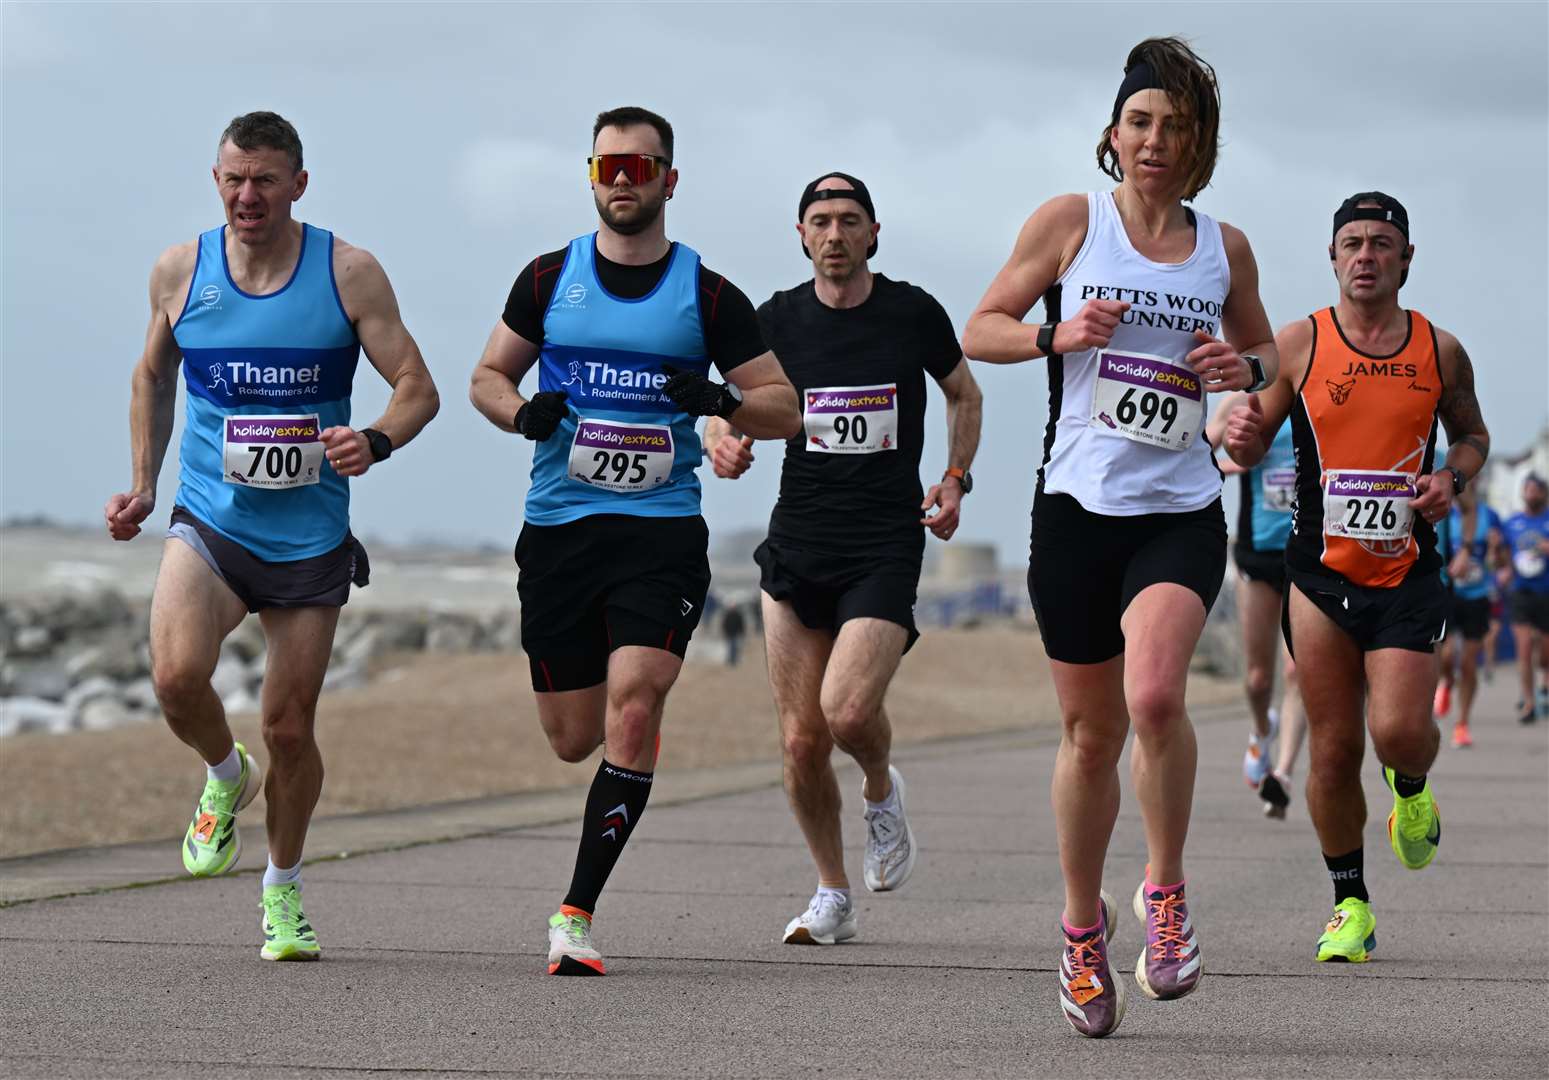 Thanet Roadrunners' Phil Stevens (No.700) and clubmate Daniel Grech (No.295) chase Petts Wood Runners' Emma Stevens (No.699). Picture: Barry Goodwin